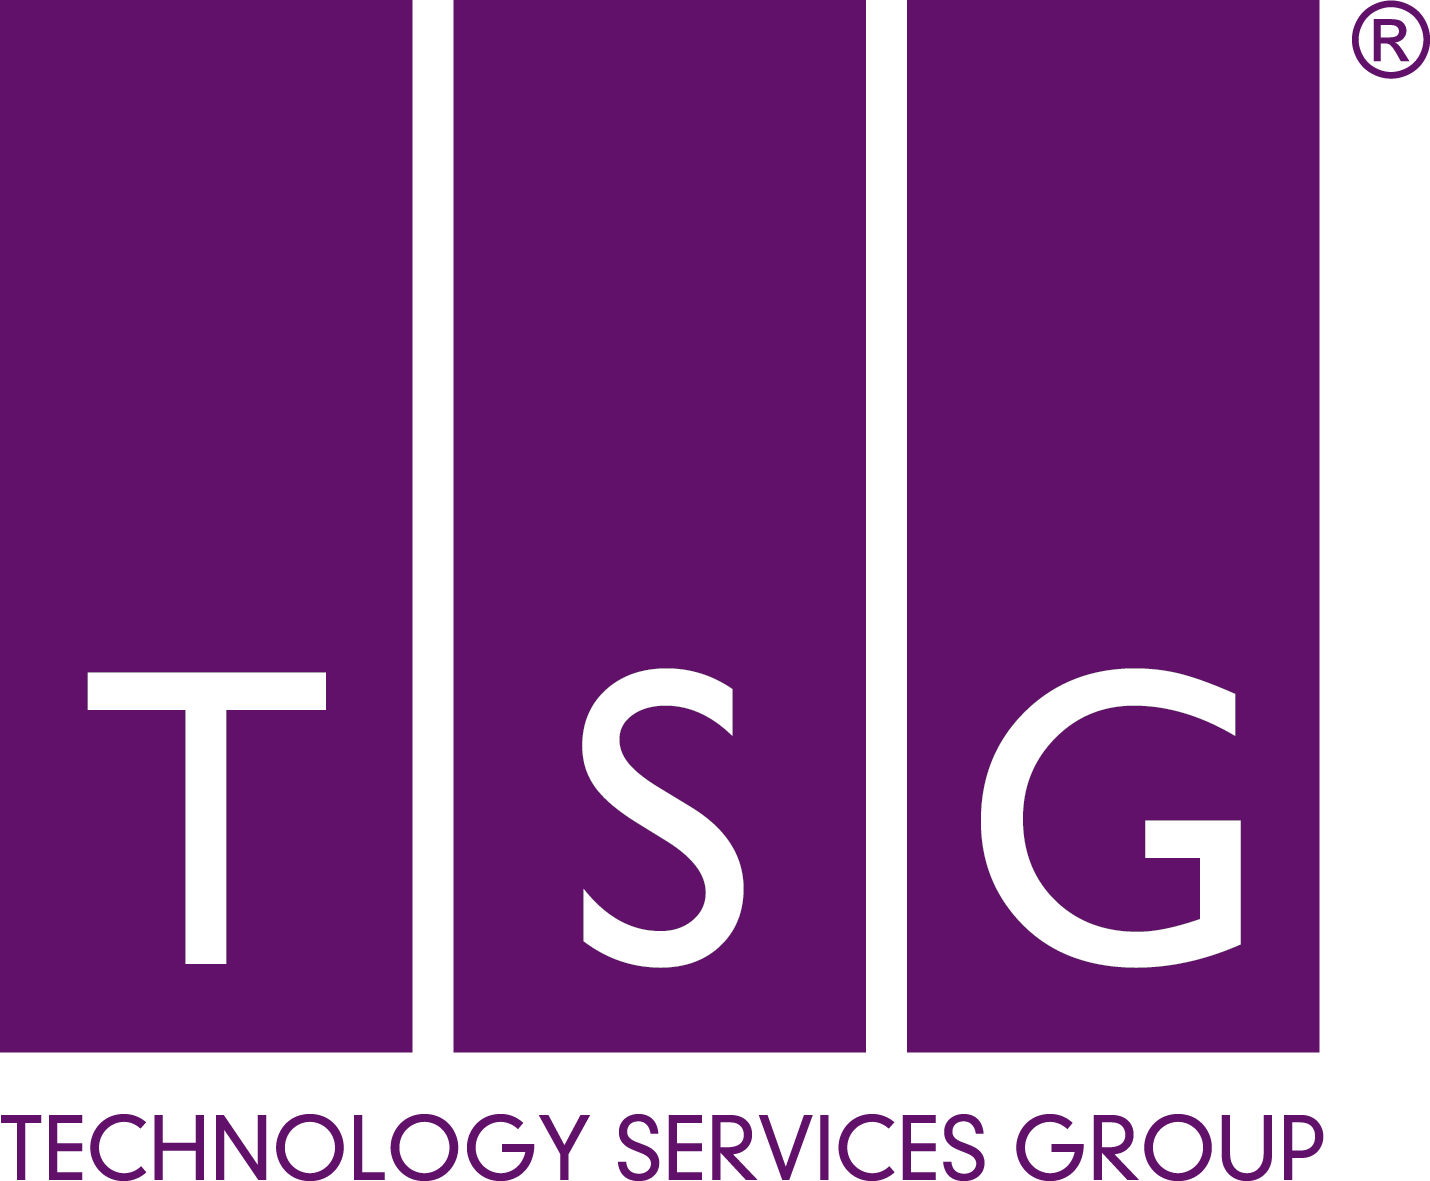 Technology Services Group